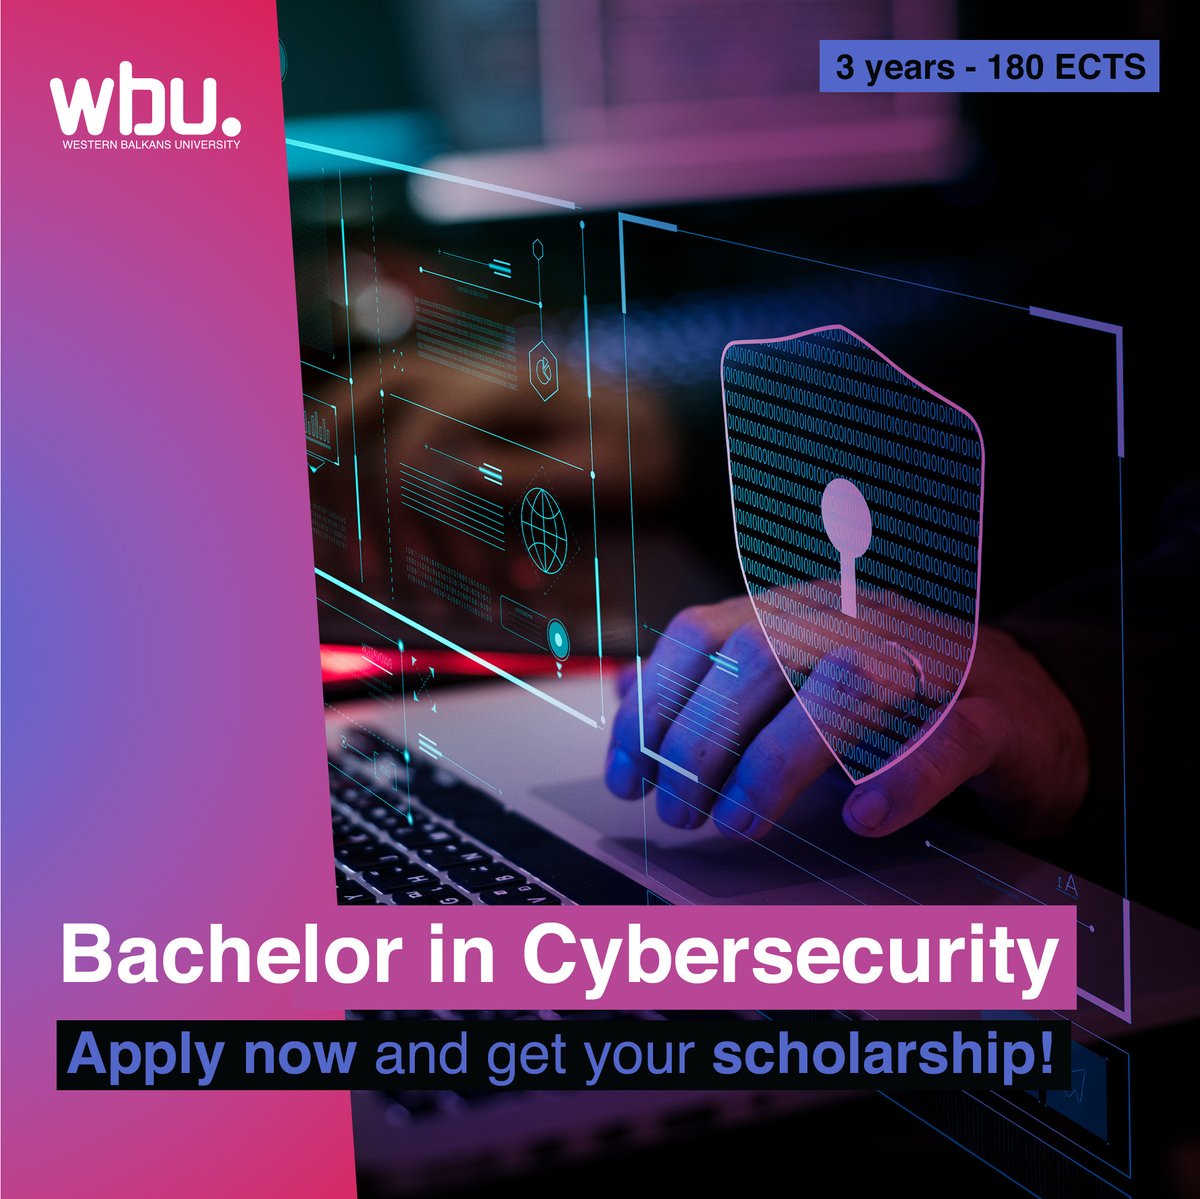 #Apply_to_wbu

👉 Bachelor in #Cybersecurity at #WBU with #scholarship
🌟 A three-year program, 180 ECTS

The curriculum of the Bachelor’s degree in Cybersecurity at #WBU includes coursework in areas such as #NetworkSecurity, #Cryptography, #ComputerForensics and #RiskManagement.